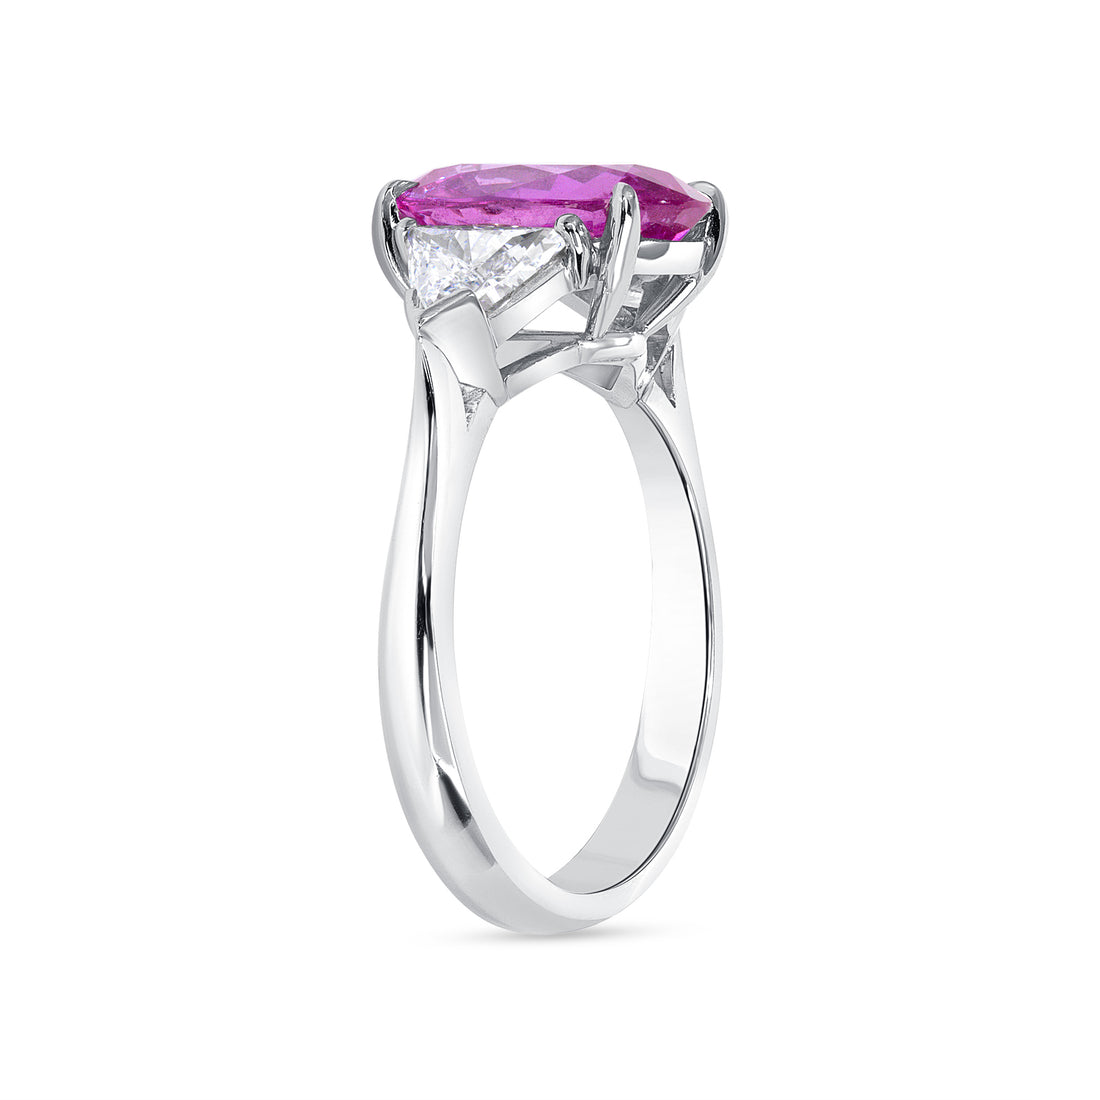 3.82 CT. Oval Cut Pink Sapphire and Triangle Cut Diamond Three Stone Ring in Platinum